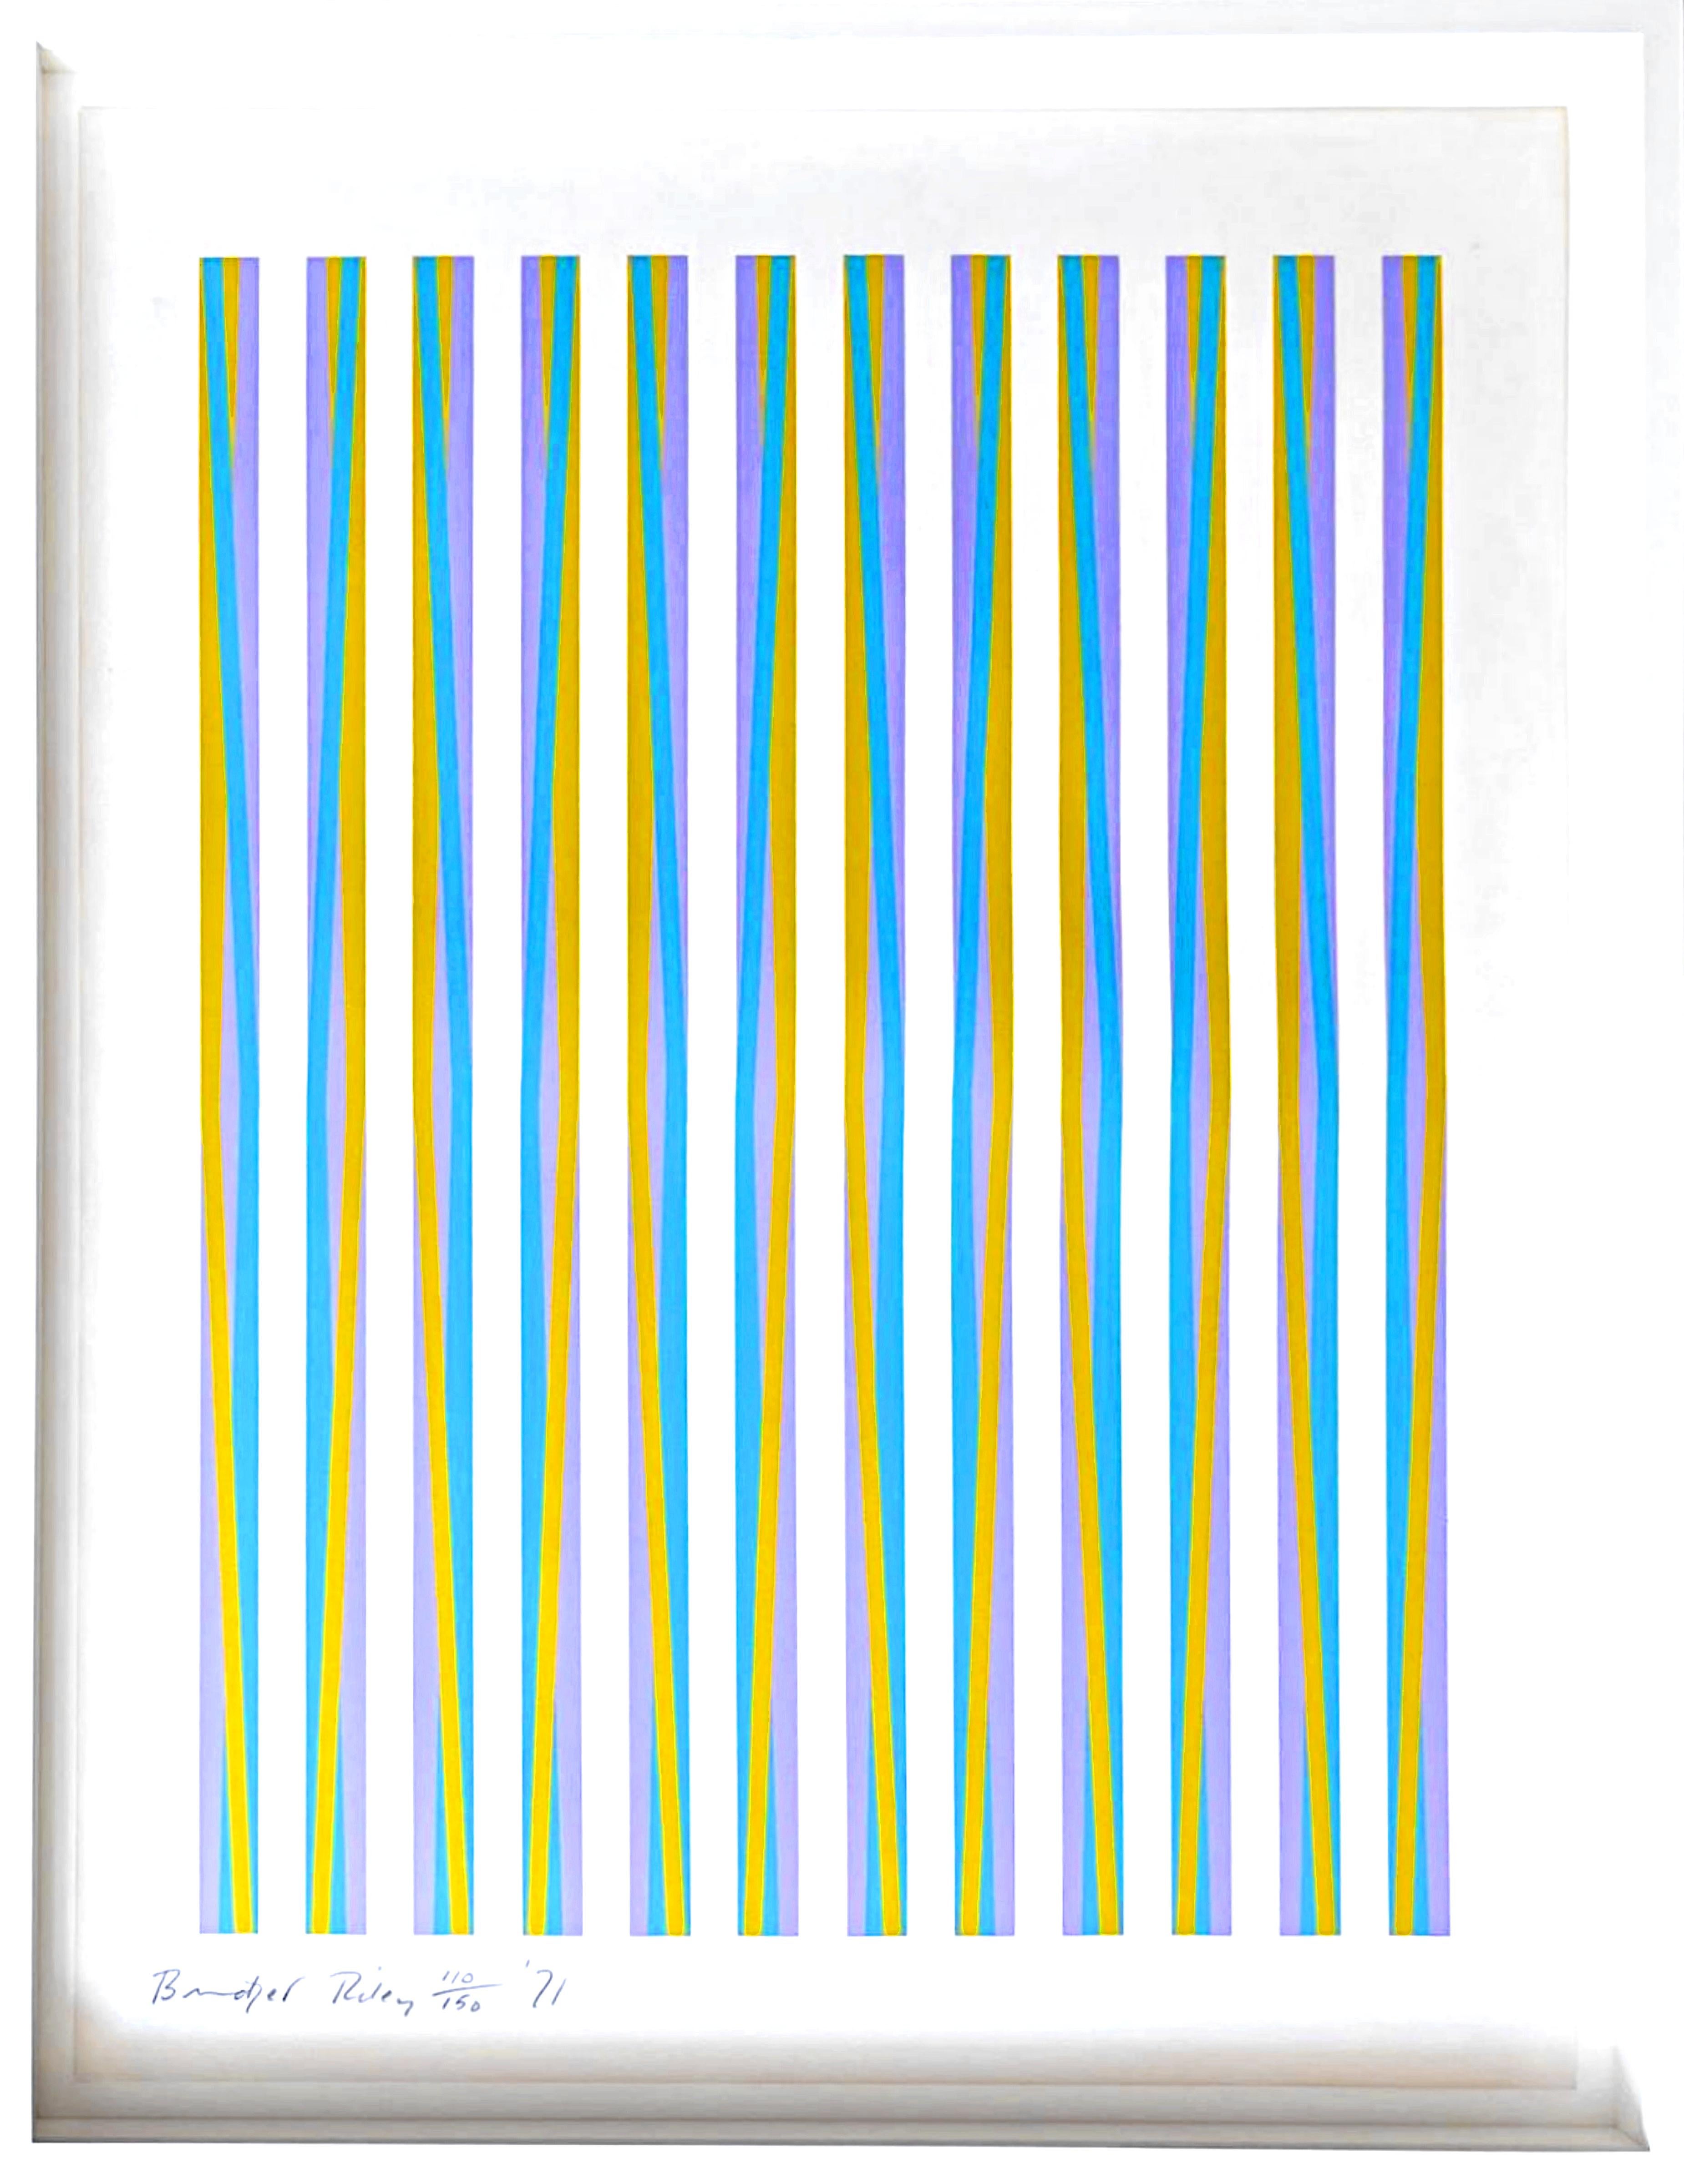 Bridget Riley
Print for The Chicago 8, from Conspiracy: The Artist as Witness (Schubert, 15), 1971
Silkscreen on 100% handmade rag paper
Signed and numbered 110/150 and dated i1971 n graphite on the front also bears the printer's distinctive blind